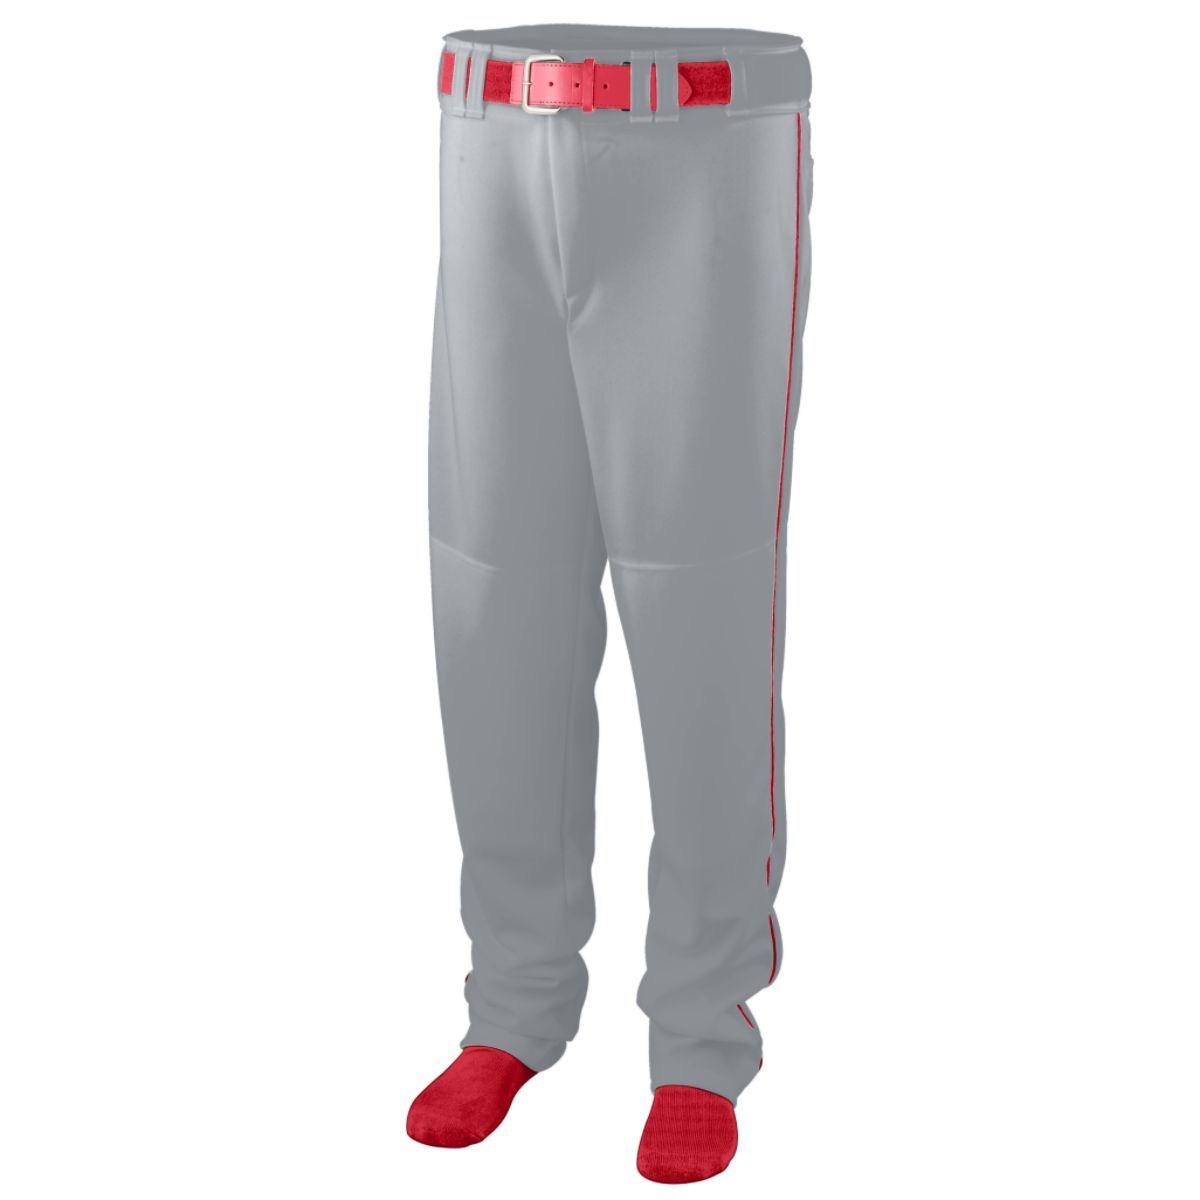 Augusta Sportswear Youth Series Baseball/Softball Pant With Piping in Silver Grey/Red  -Part of the Youth, Youth-Pants, Pants, Augusta-Products, Baseball, All-Sports, All-Sports-1 product lines at KanaleyCreations.com